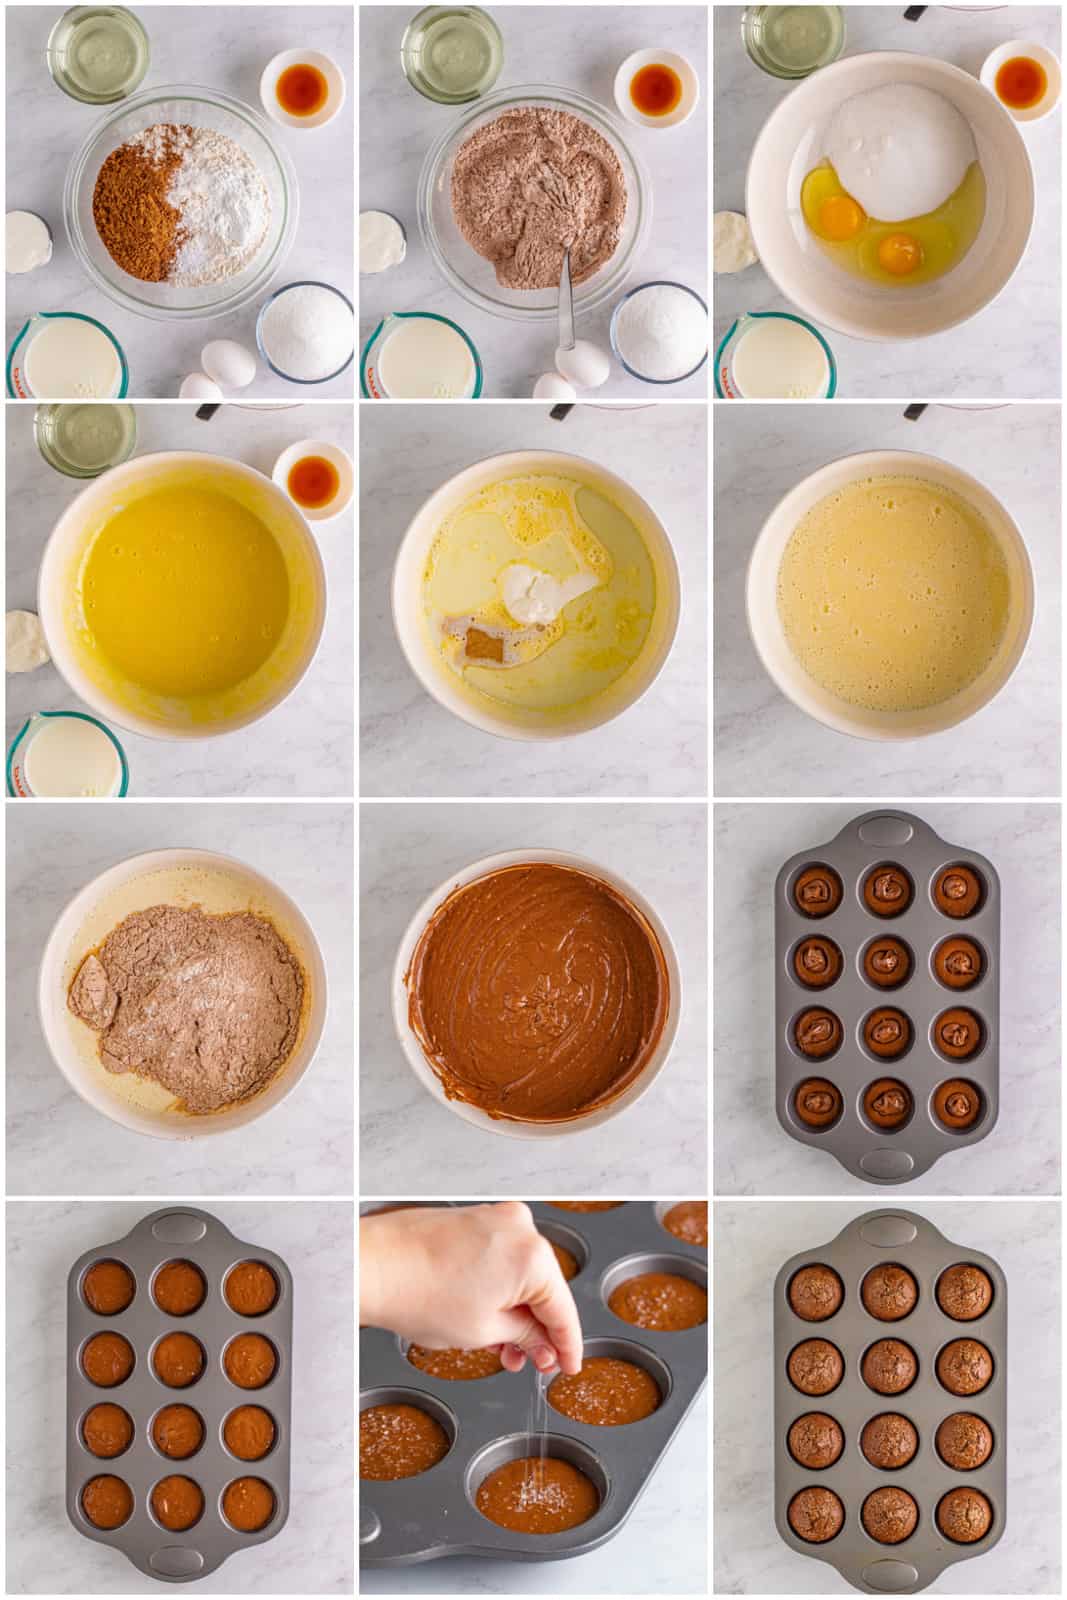 Step by step photos on how to make Chocolate Nutella Muffins.